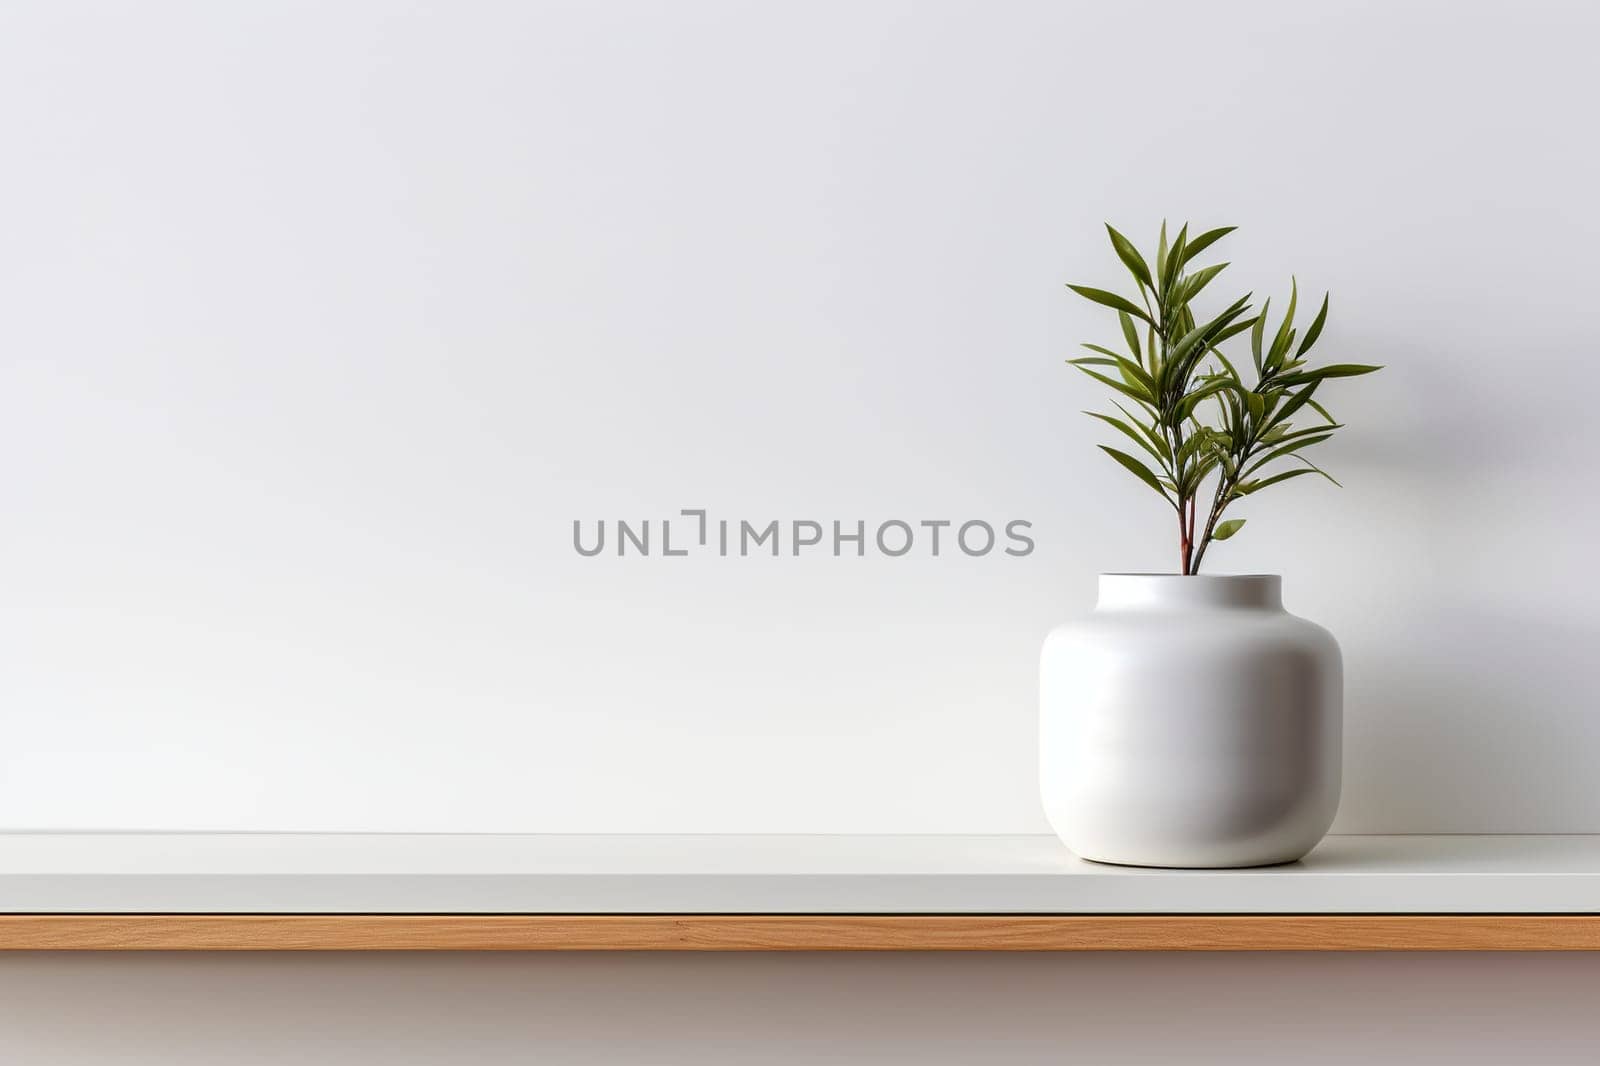 Wooden shelf with a green plant in a white pot against a white wall. Minimalism.